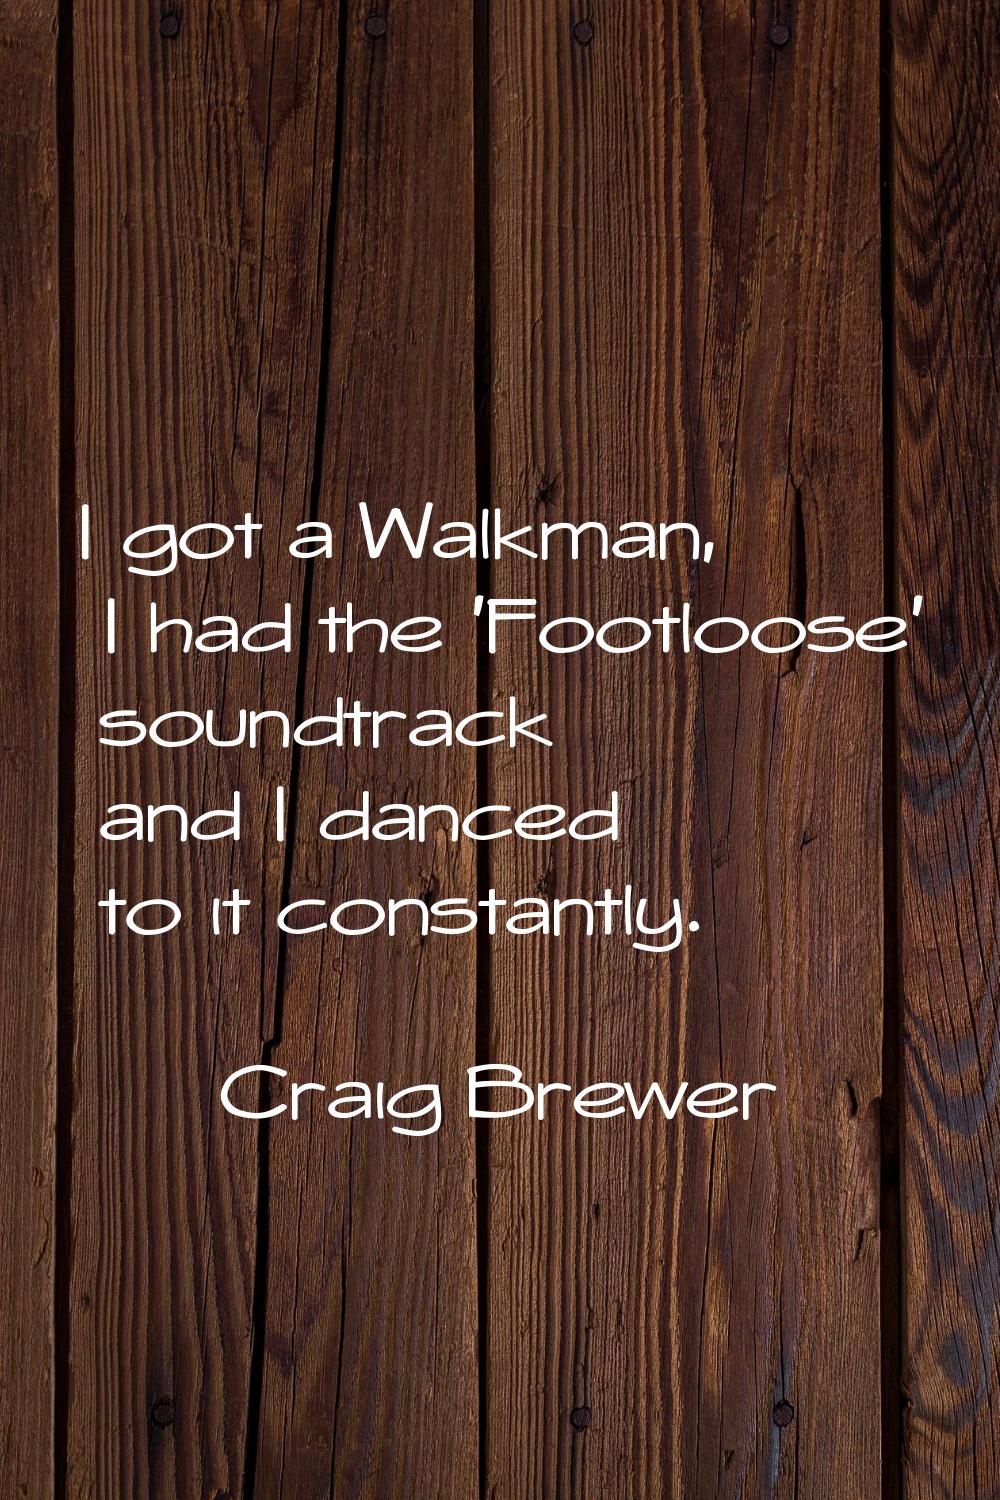 I got a Walkman, I had the 'Footloose' soundtrack and I danced to it constantly.